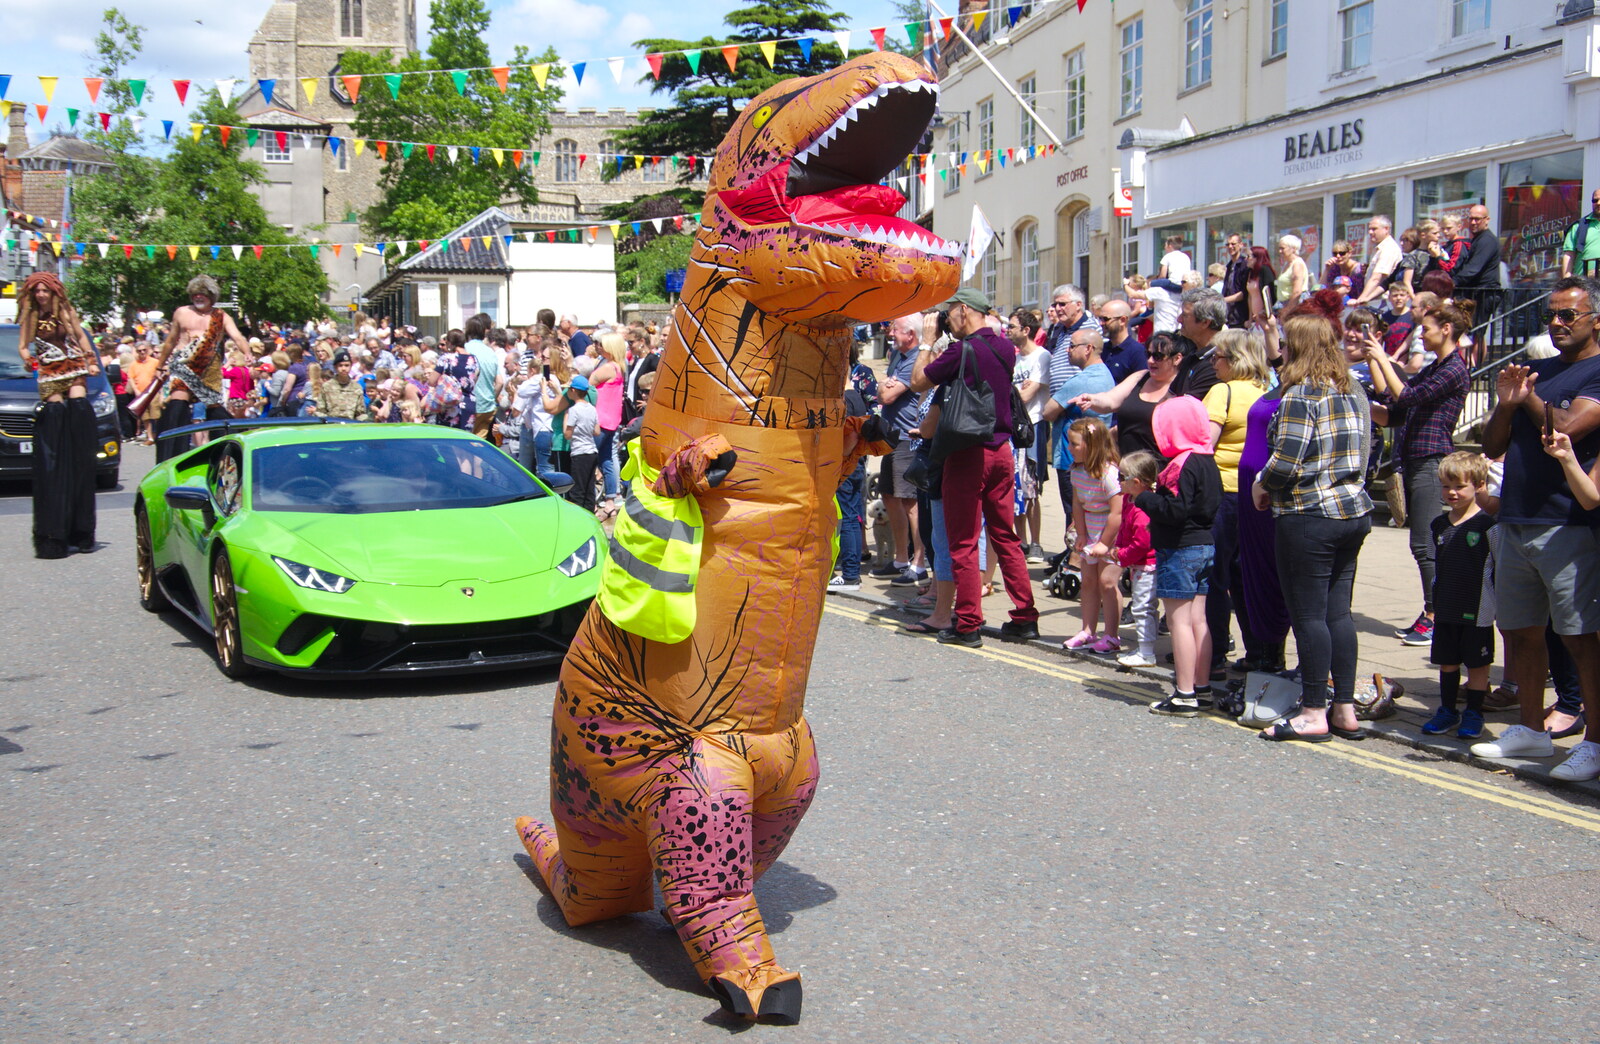 An inflatable dinosaur and a green Lambourghini from The Diss Carnival 2019, Diss, Norfolk - 9th June 2019